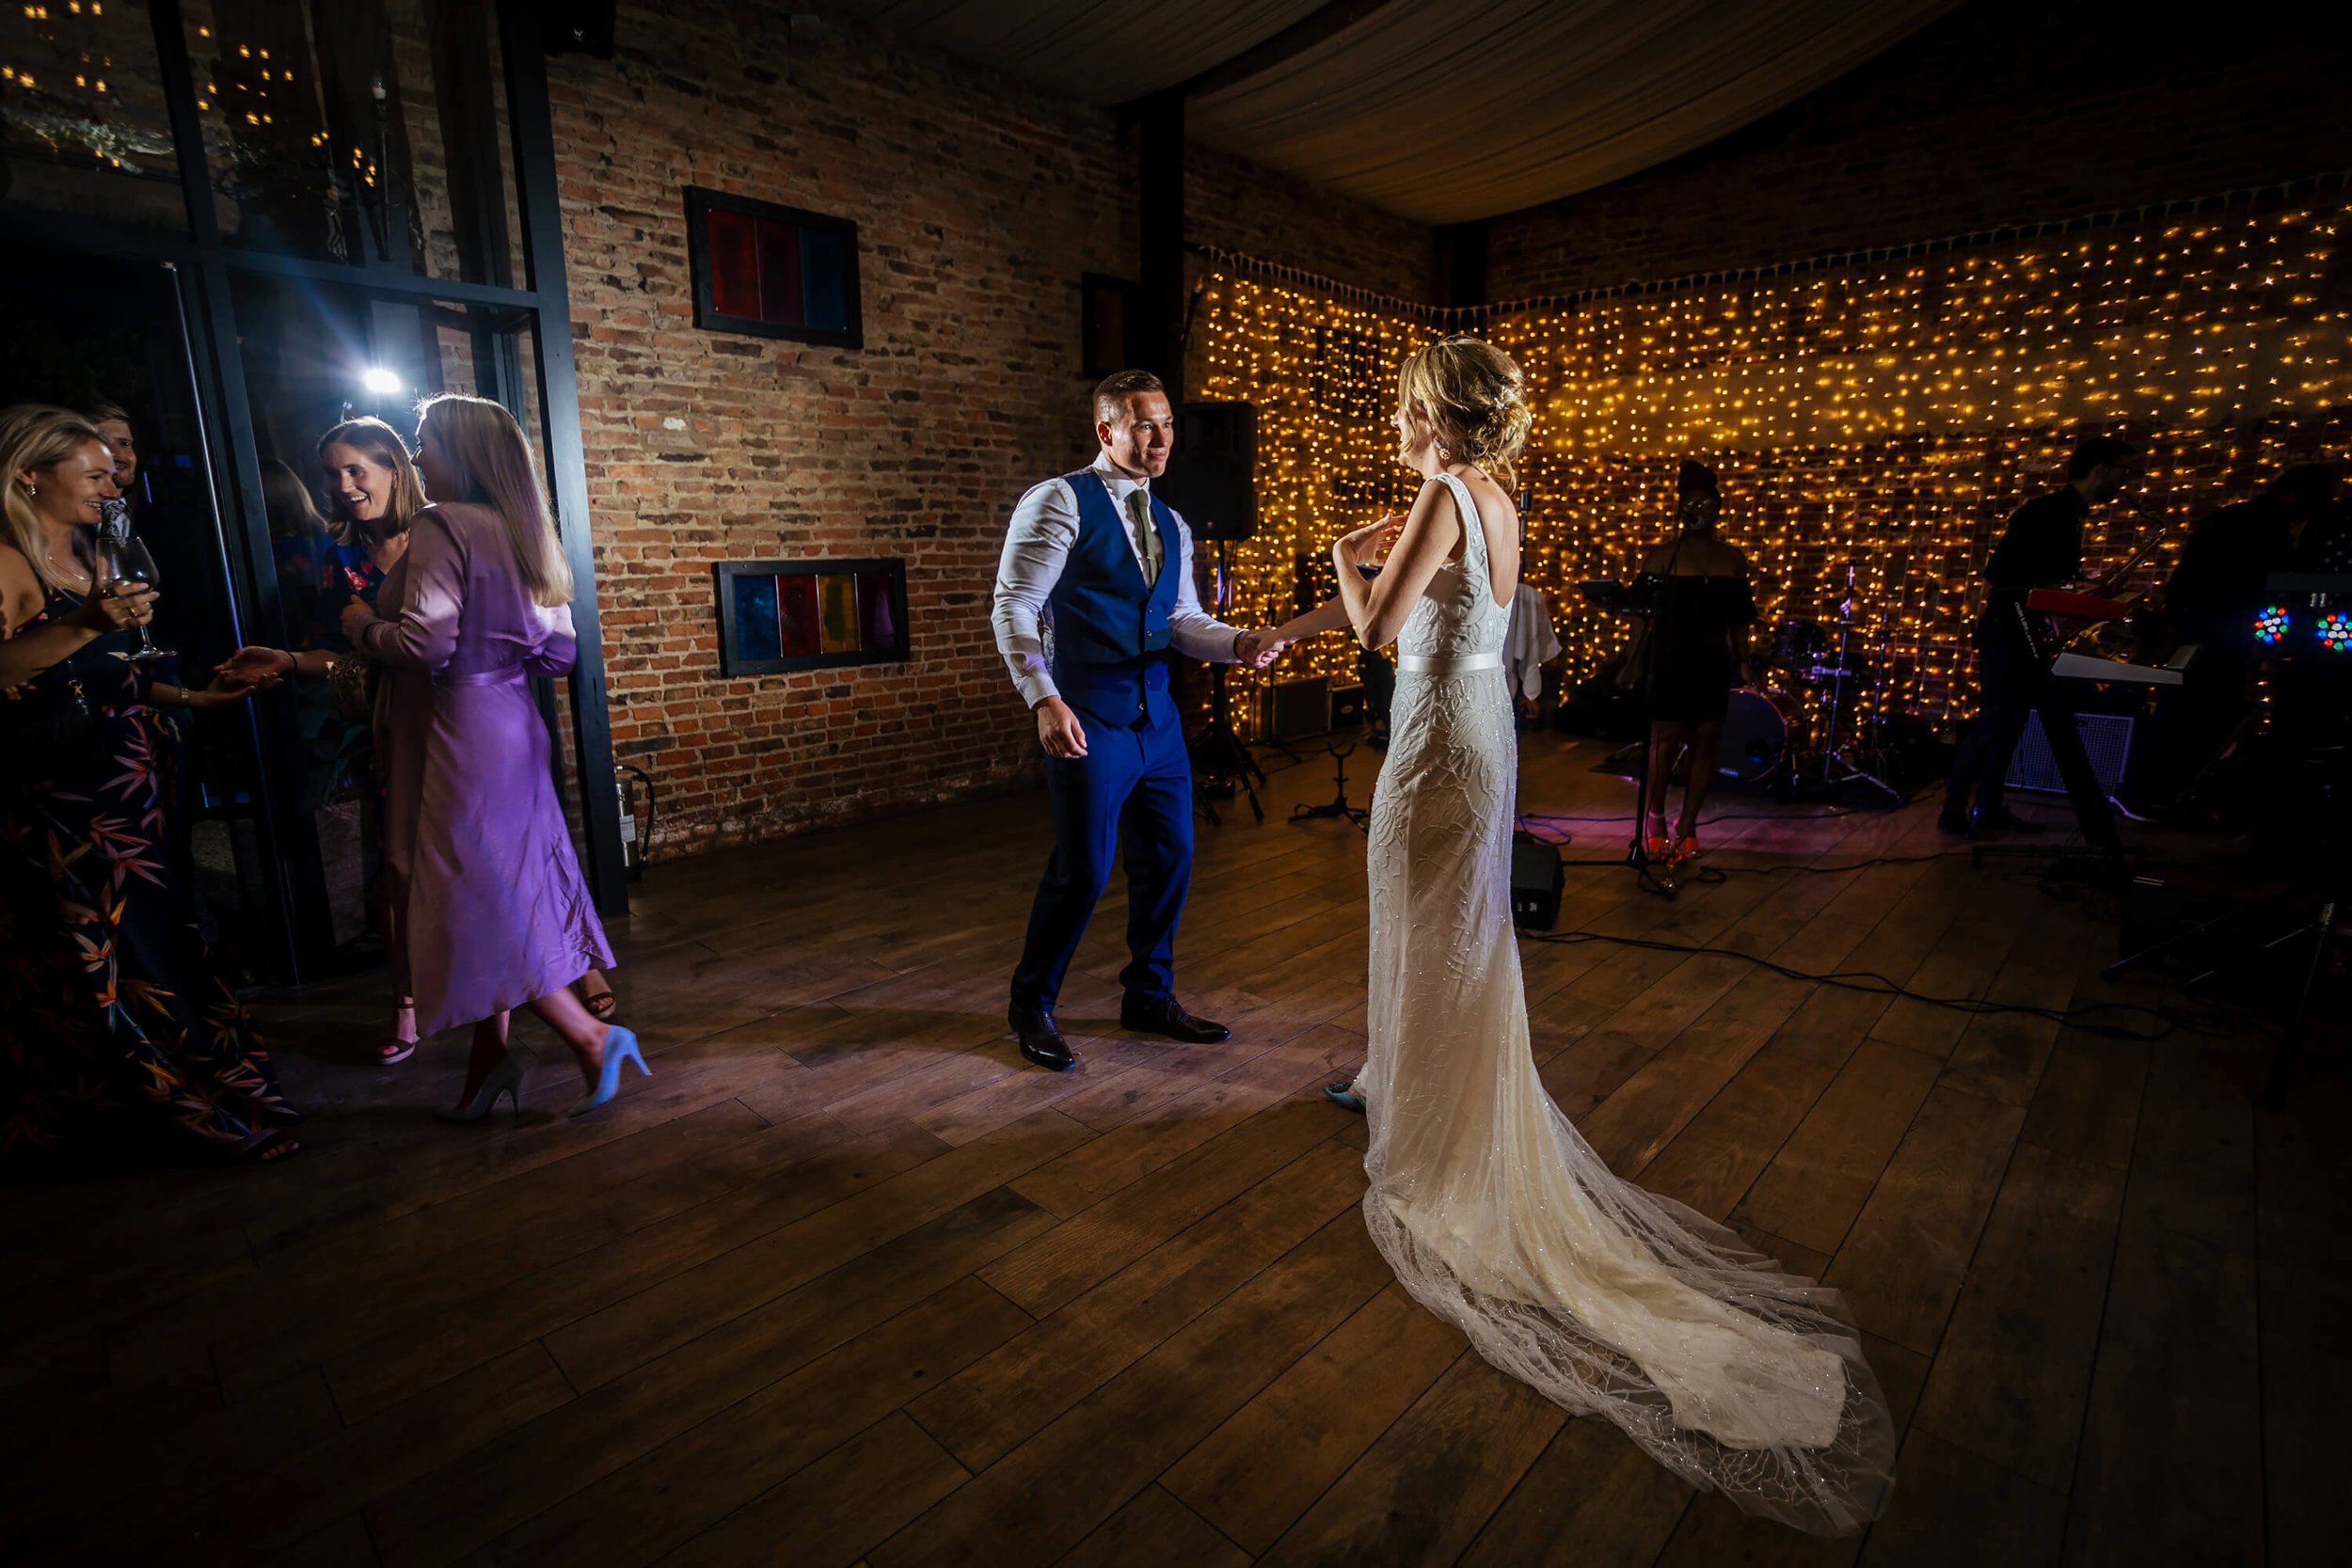 Bride and groom on the dance floor at their wedding